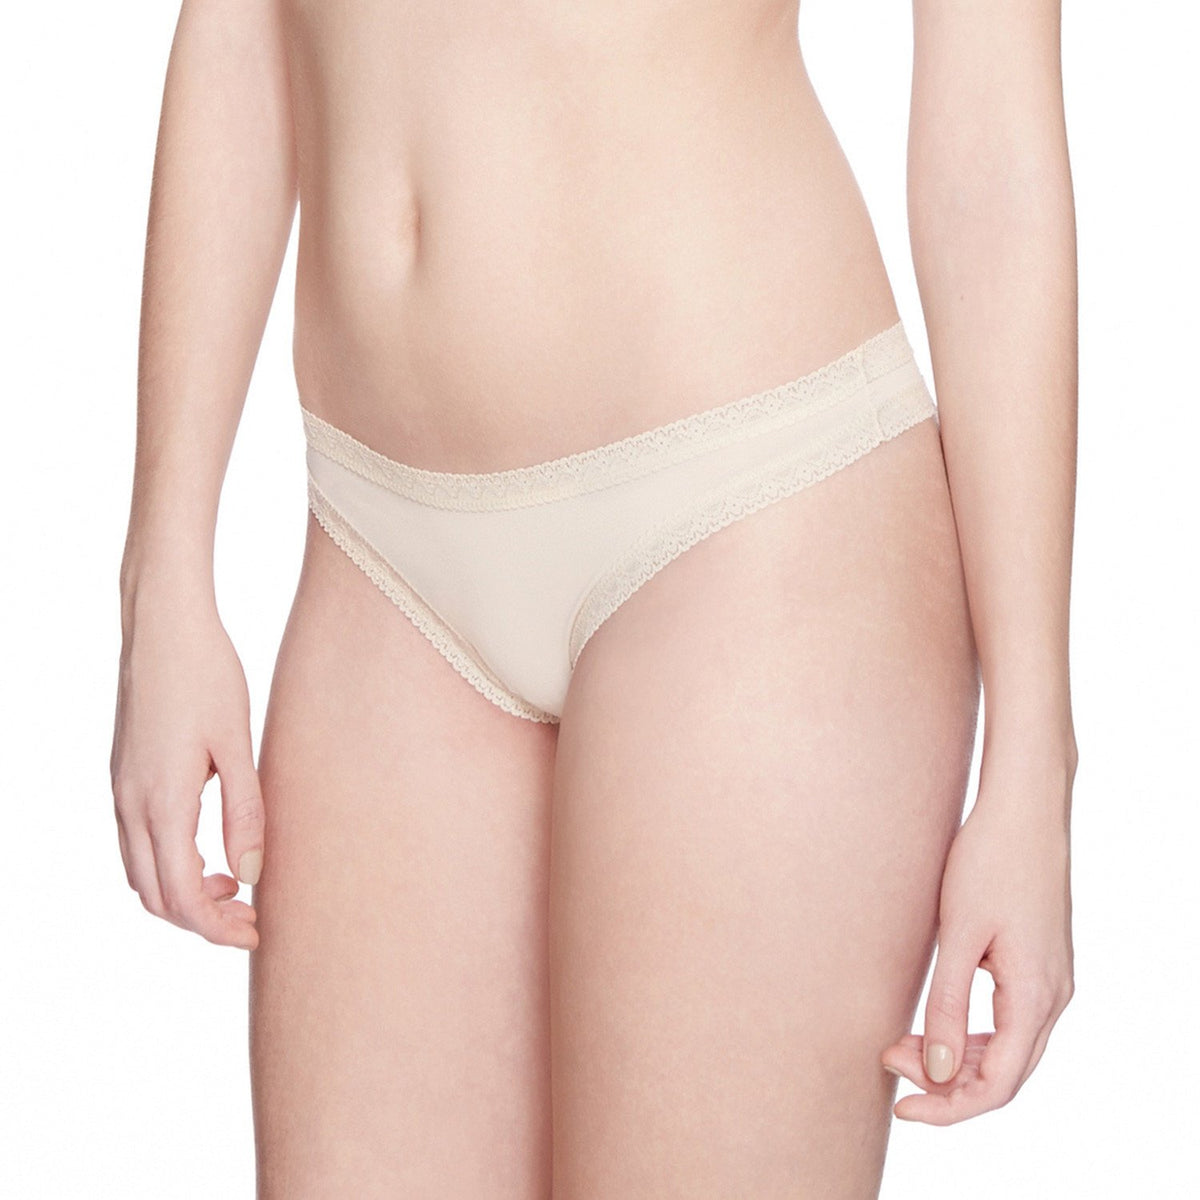 Blush Pretty Little Panties Thong In Stock At UK Tights